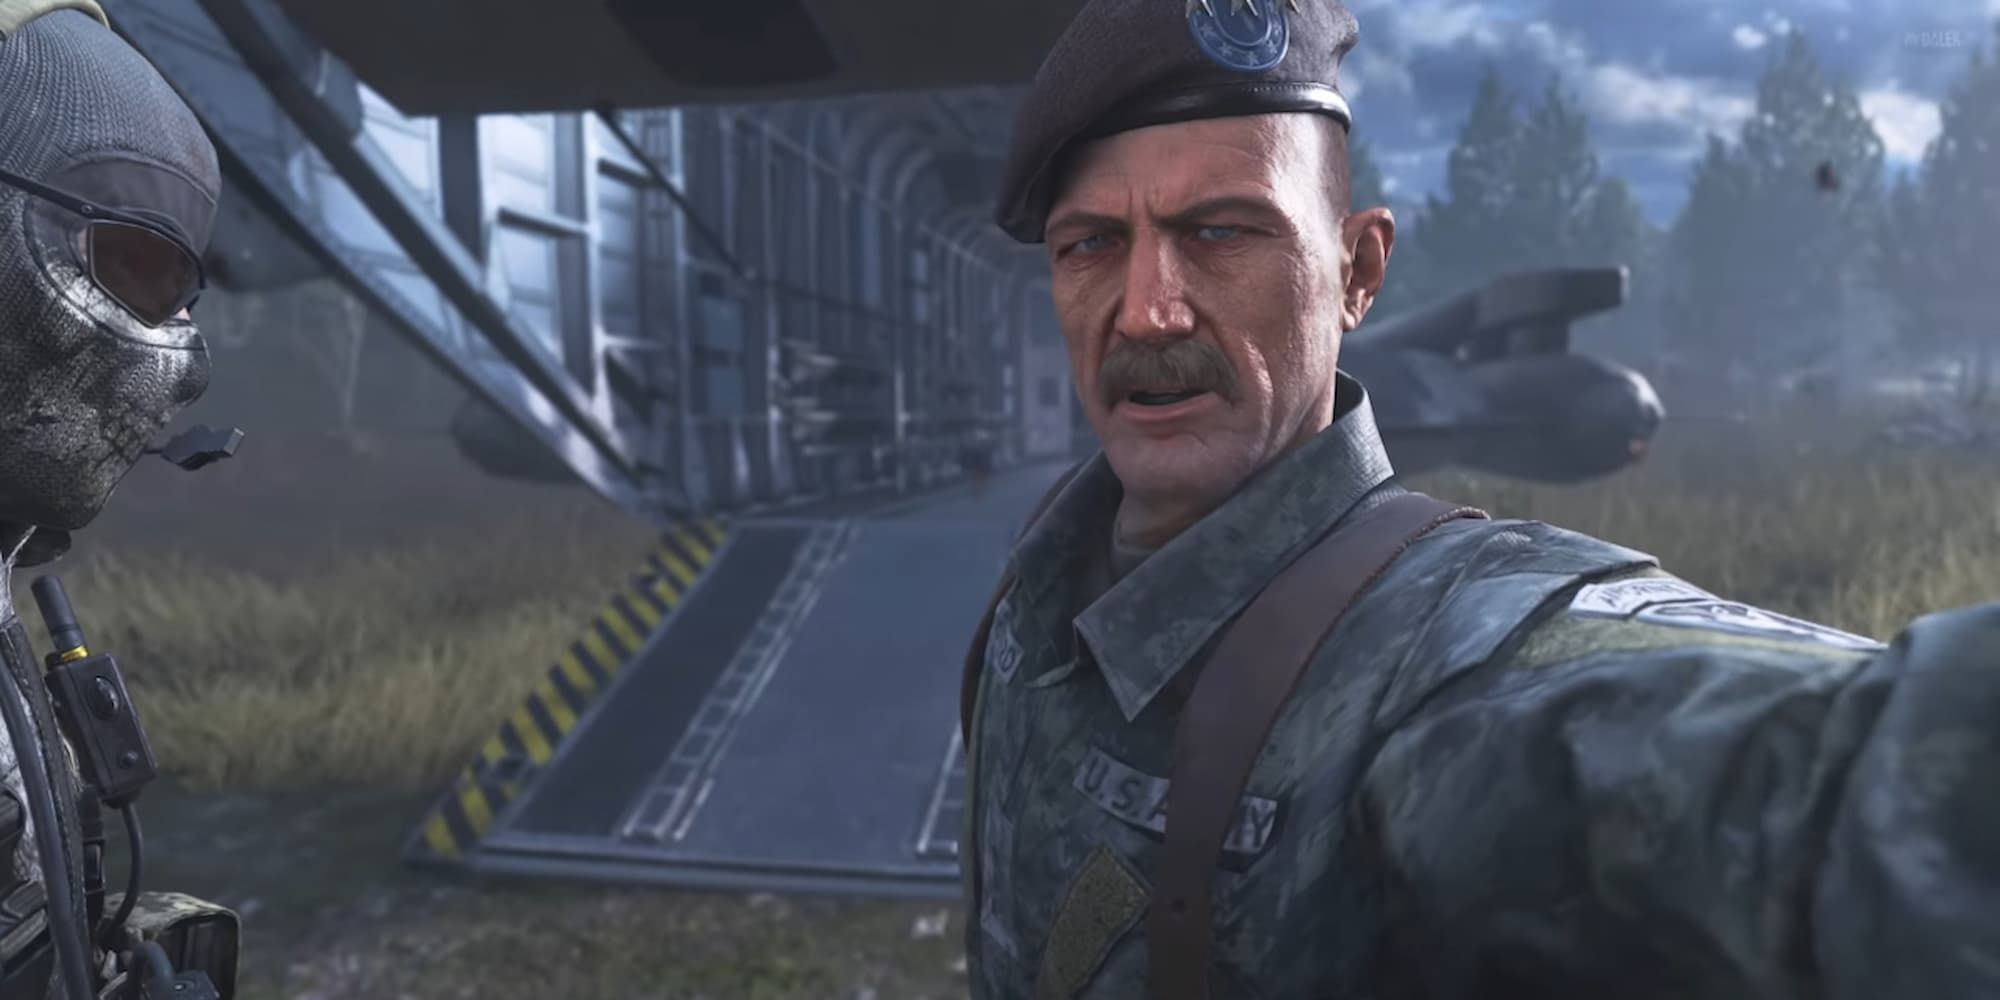 General Shepherd pulls the player character forward after exiting a helicopter.